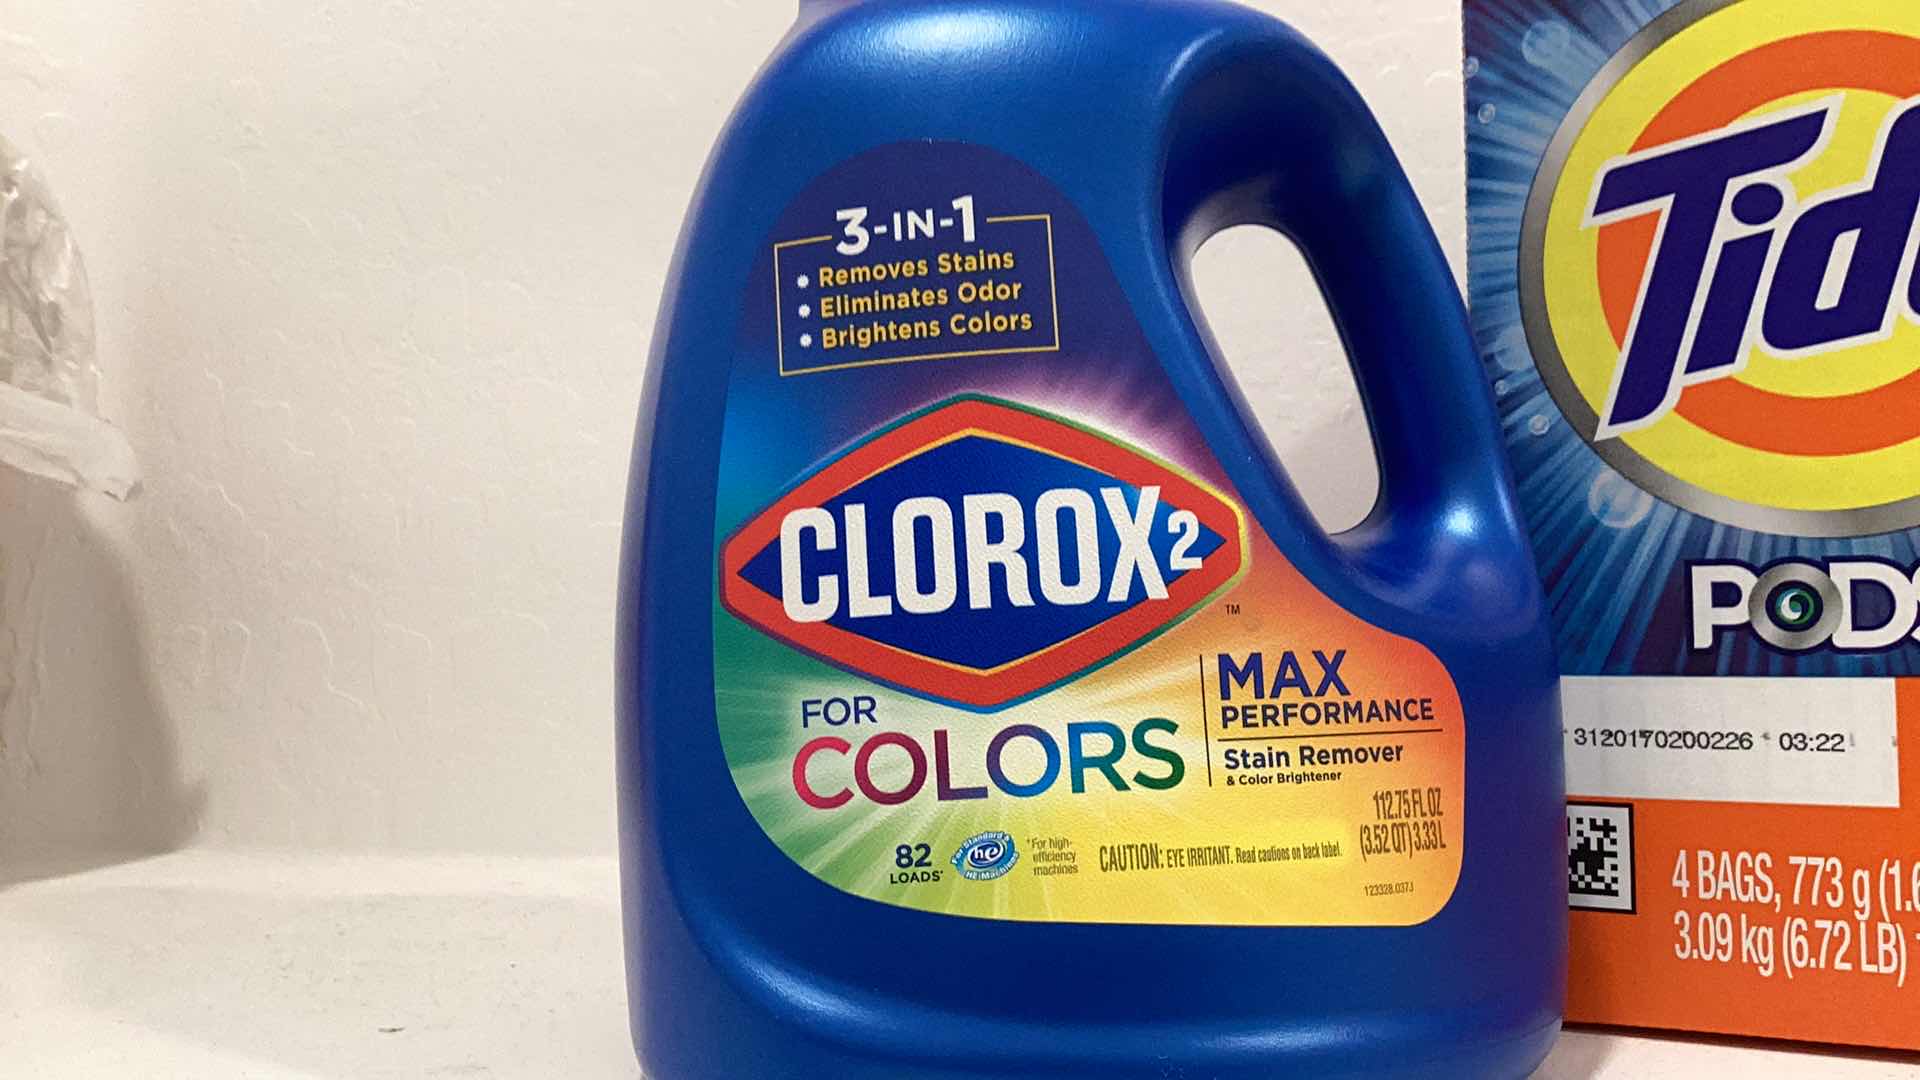 Photo 2 of CLOROX LAUNDRY DETERGENT LASTING FOR 82 LOADS AND TIDE PODS WITH 104 PACKS.